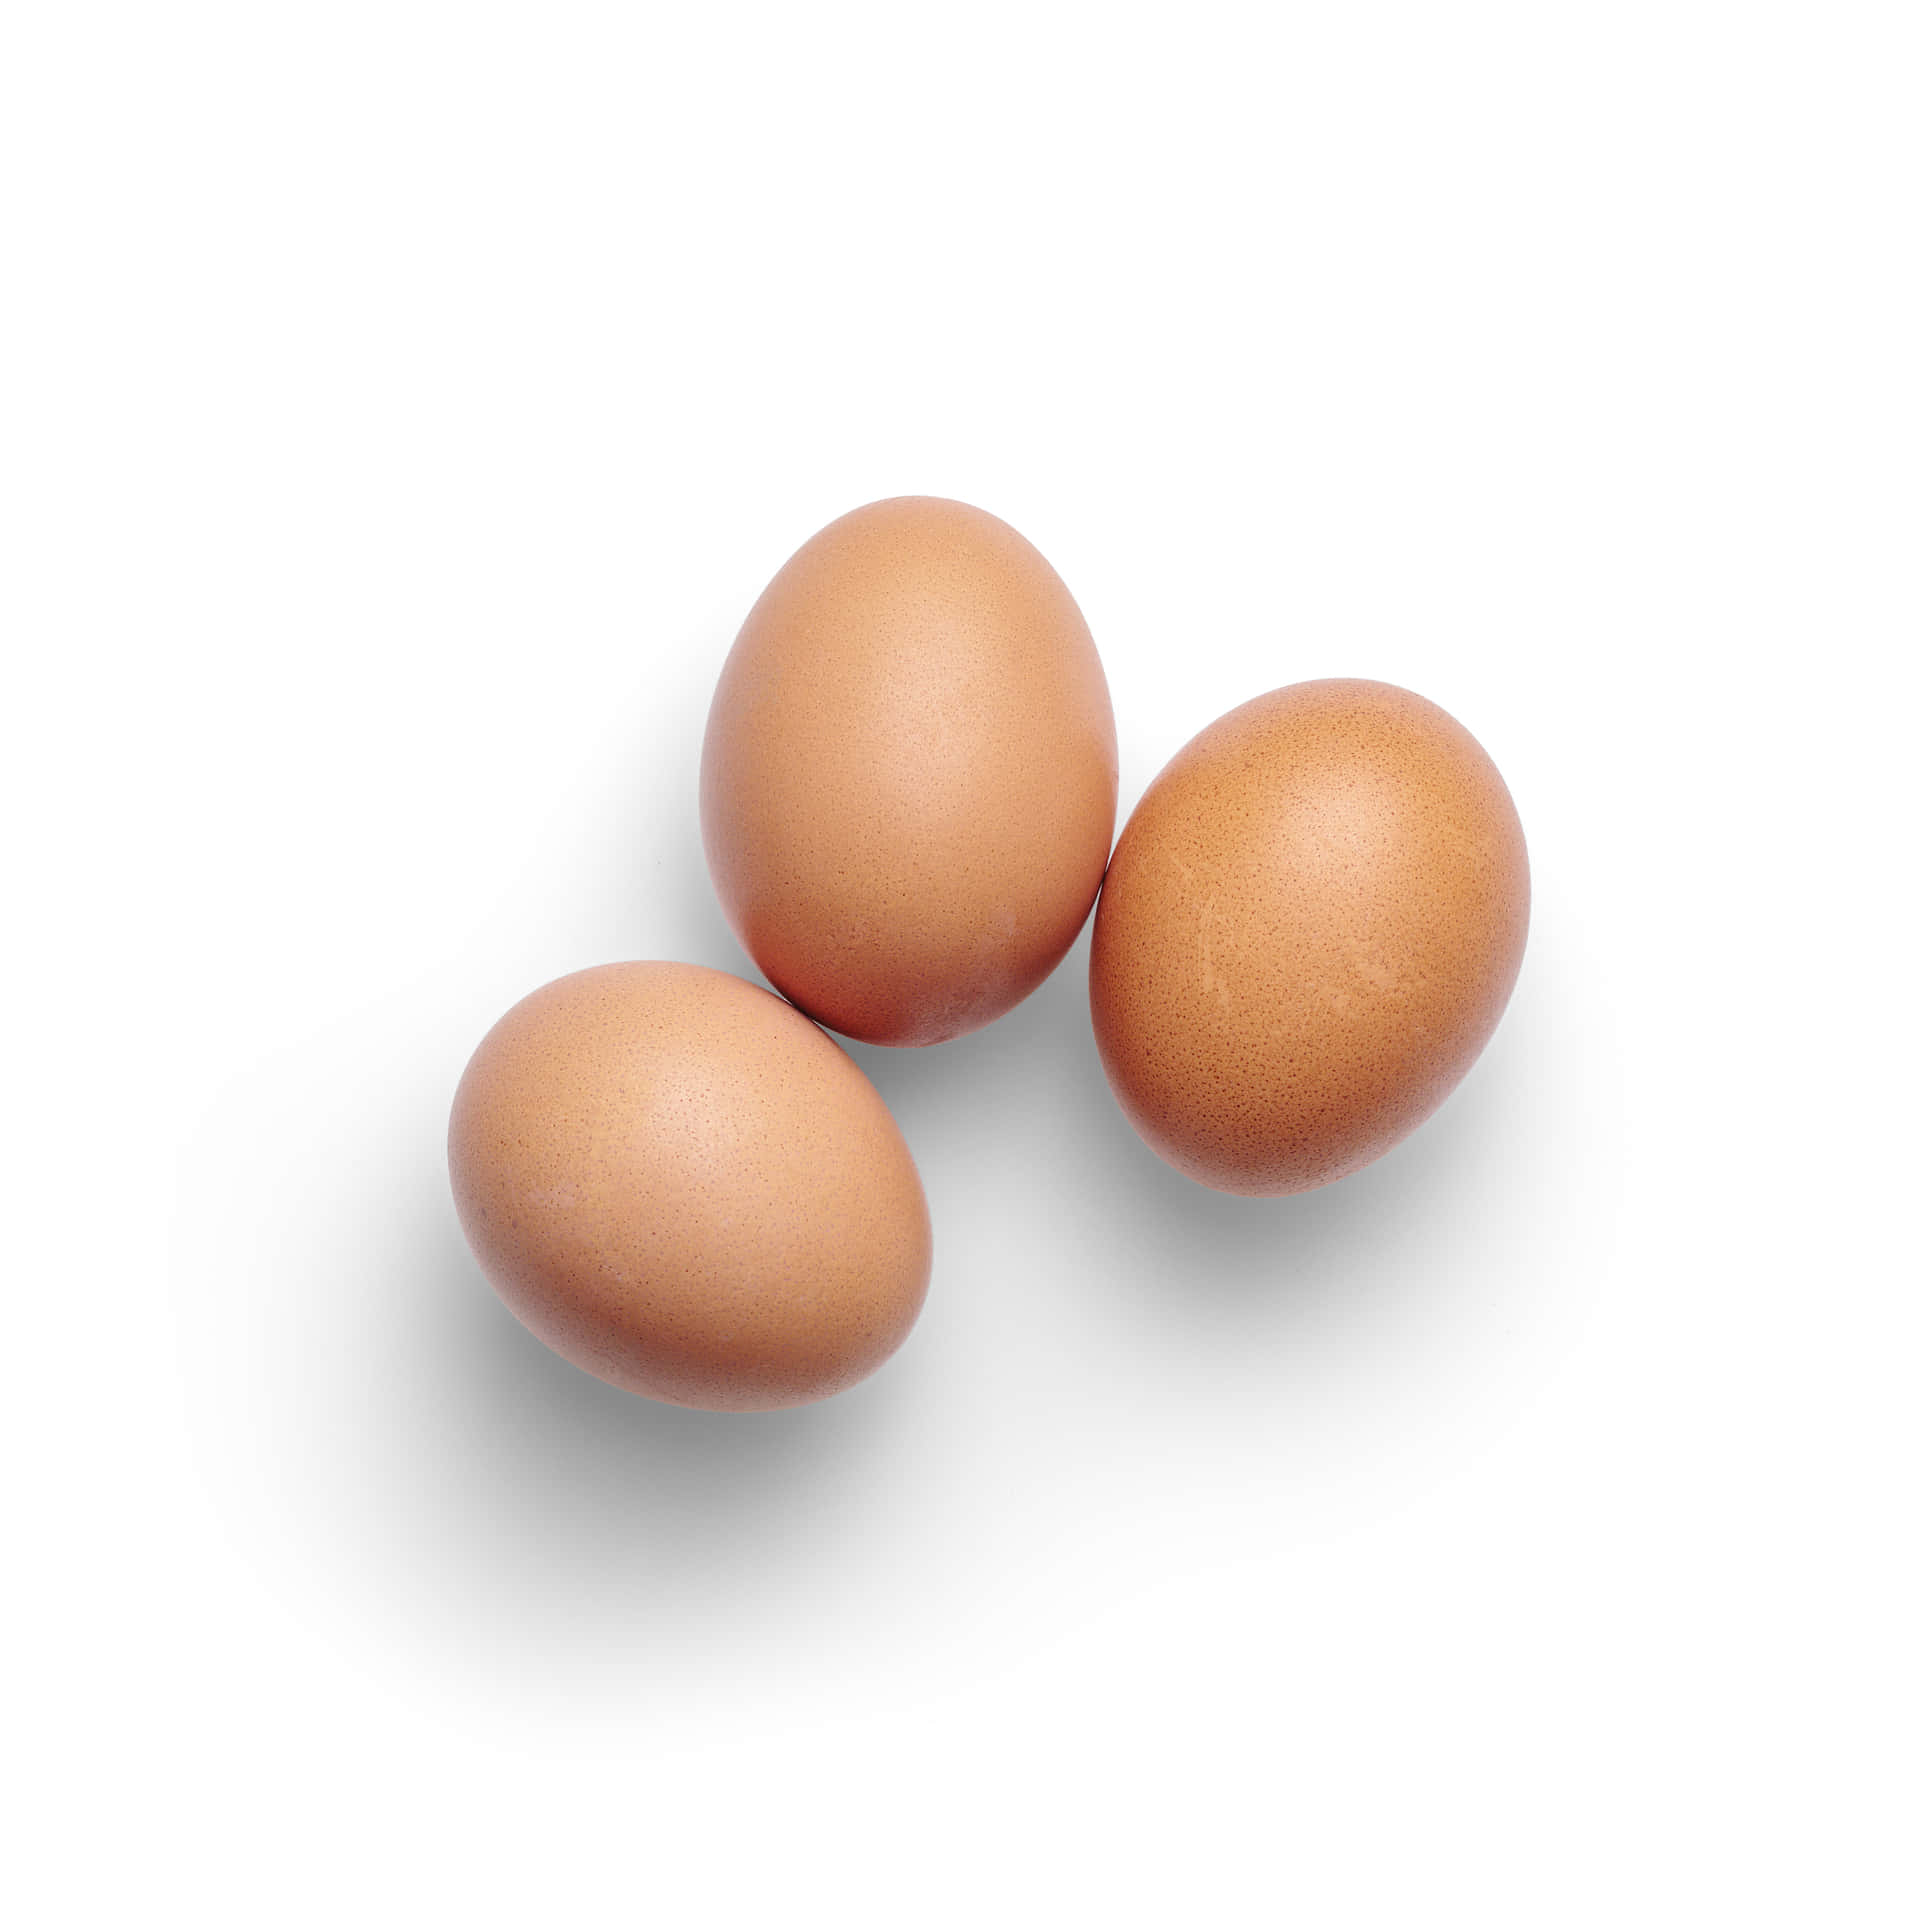 Three Brown Eggs On A White Background